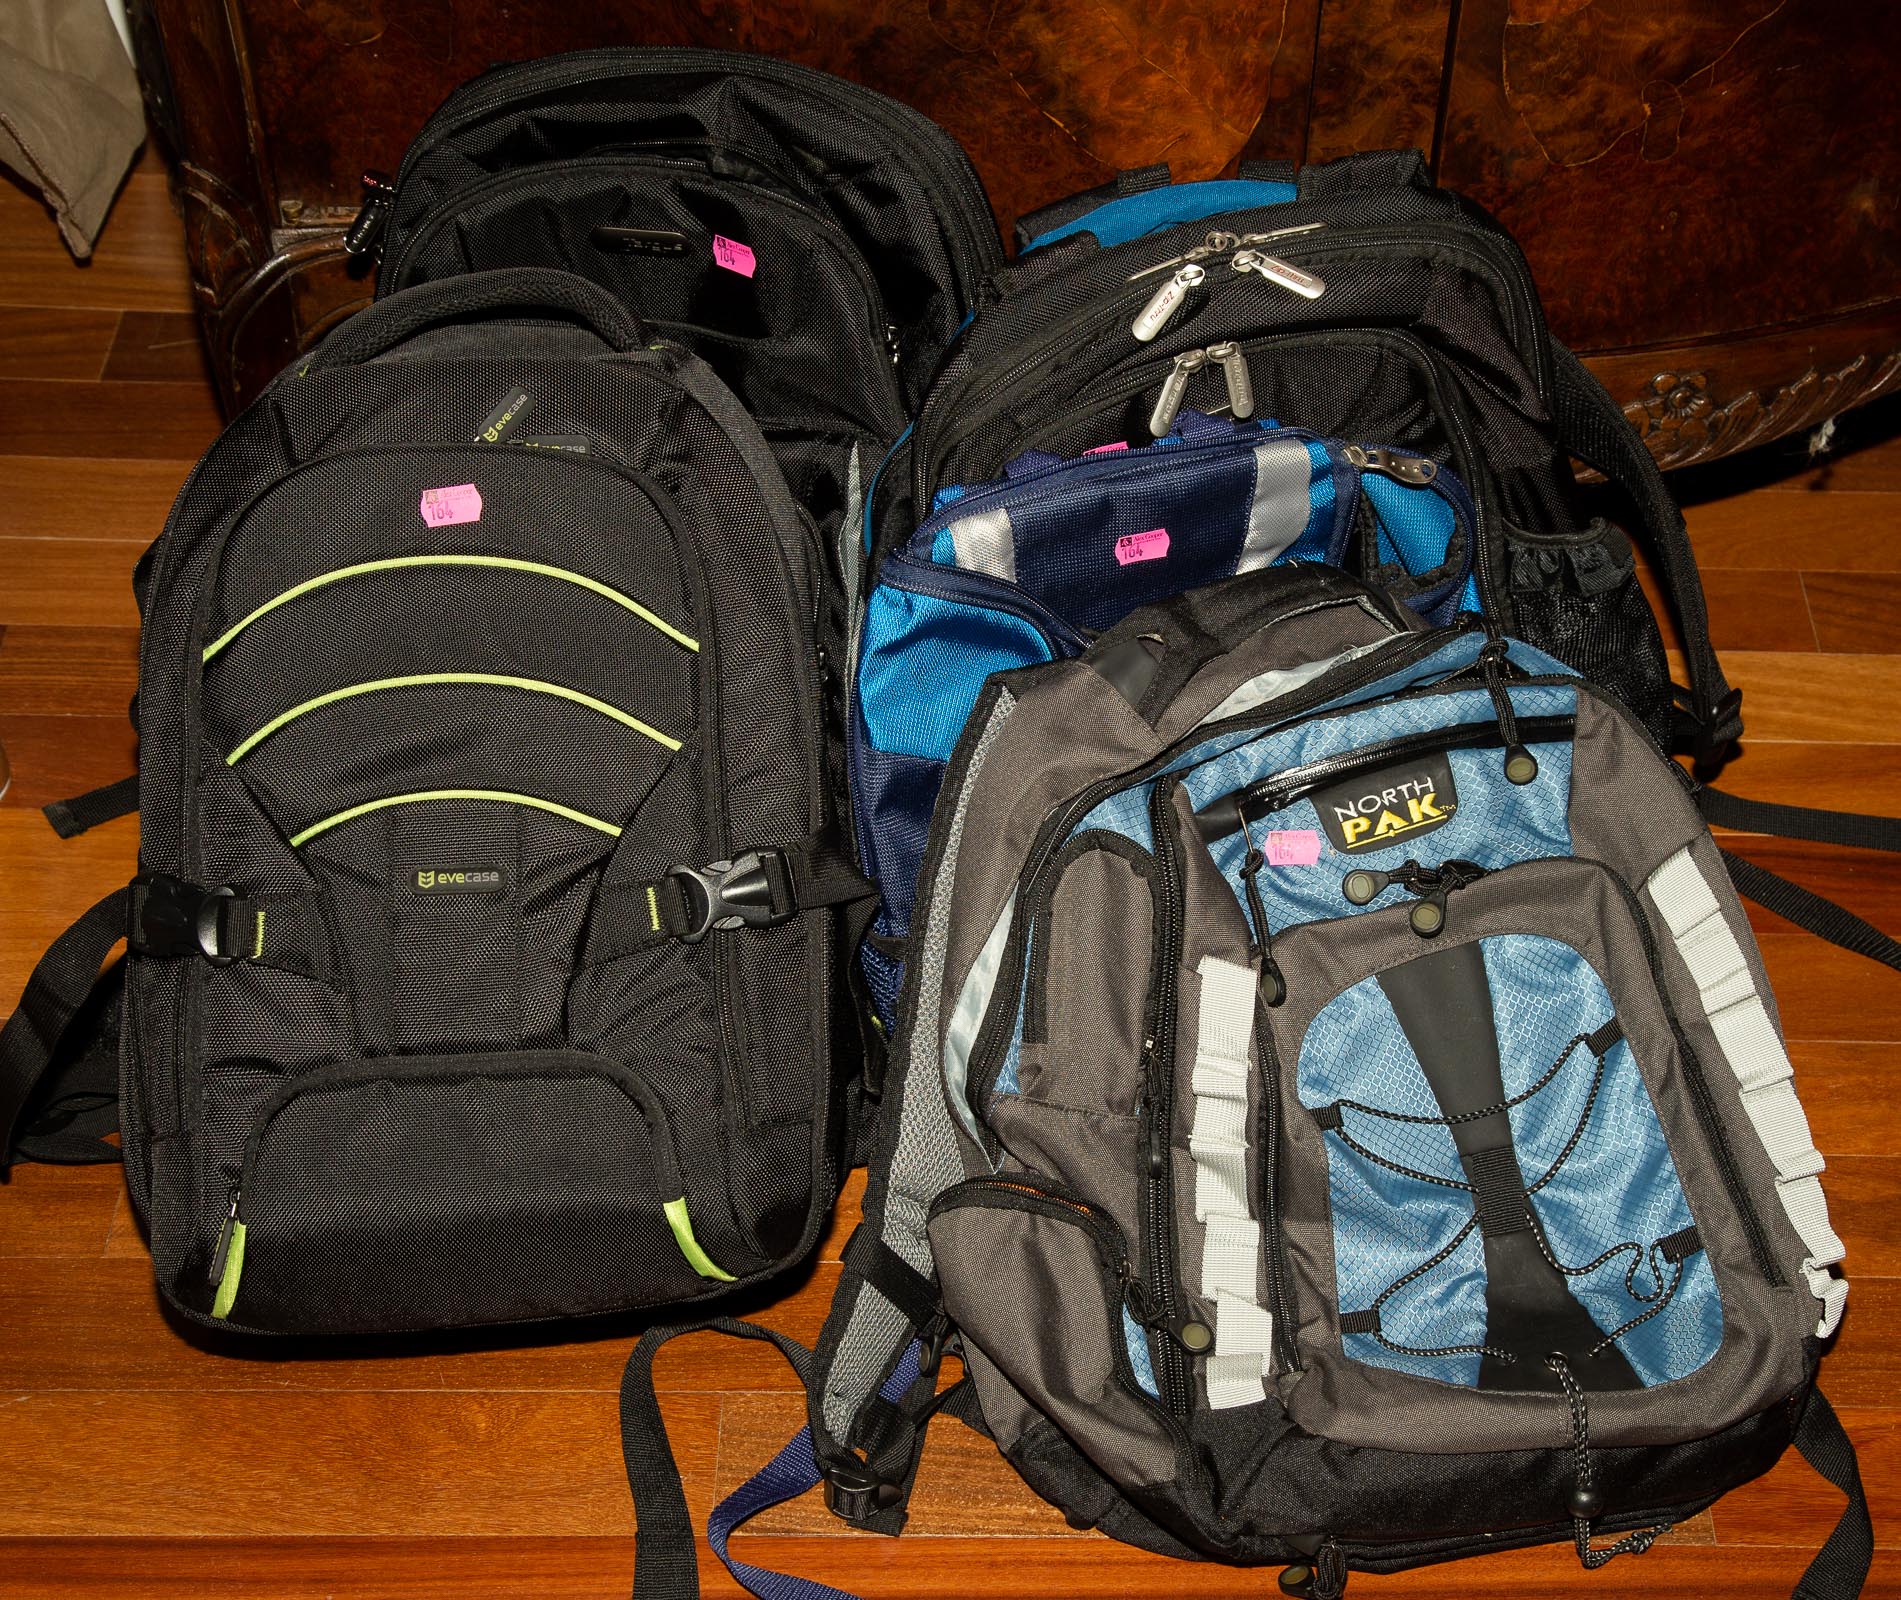 SIX ASSORTED BACKPACKS *located in master